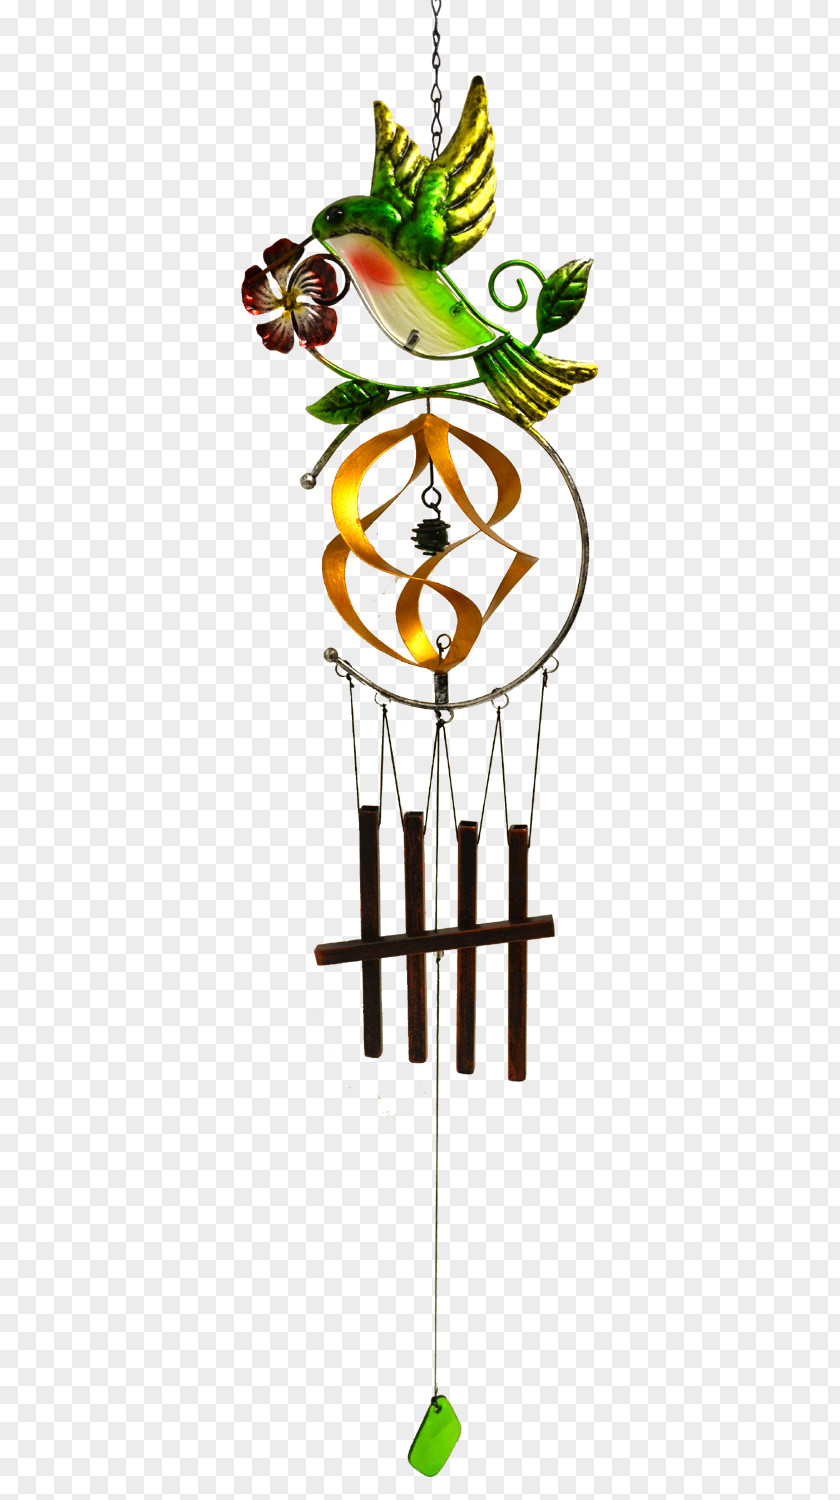 Hummingbird Garden Signs Great World Company Stained Glass With Spiral Wind Chime Clip Art Illustration Flower PNG